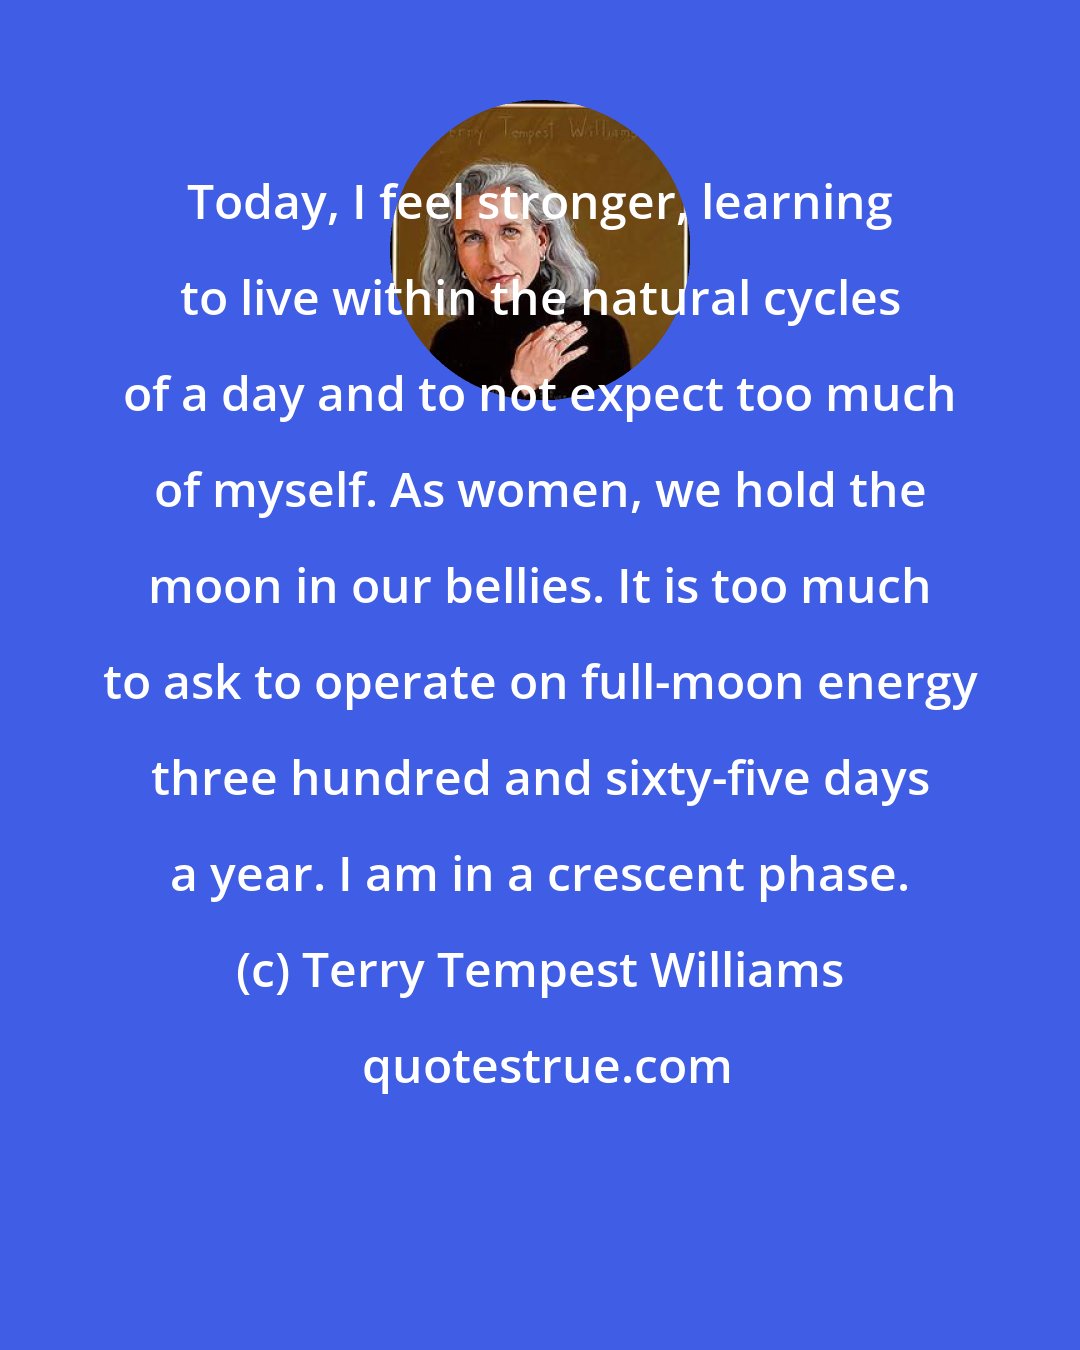 Terry Tempest Williams: Today, I feel stronger, learning to live within the natural cycles of a day and to not expect too much of myself. As women, we hold the moon in our bellies. It is too much to ask to operate on full-moon energy three hundred and sixty-five days a year. I am in a crescent phase.